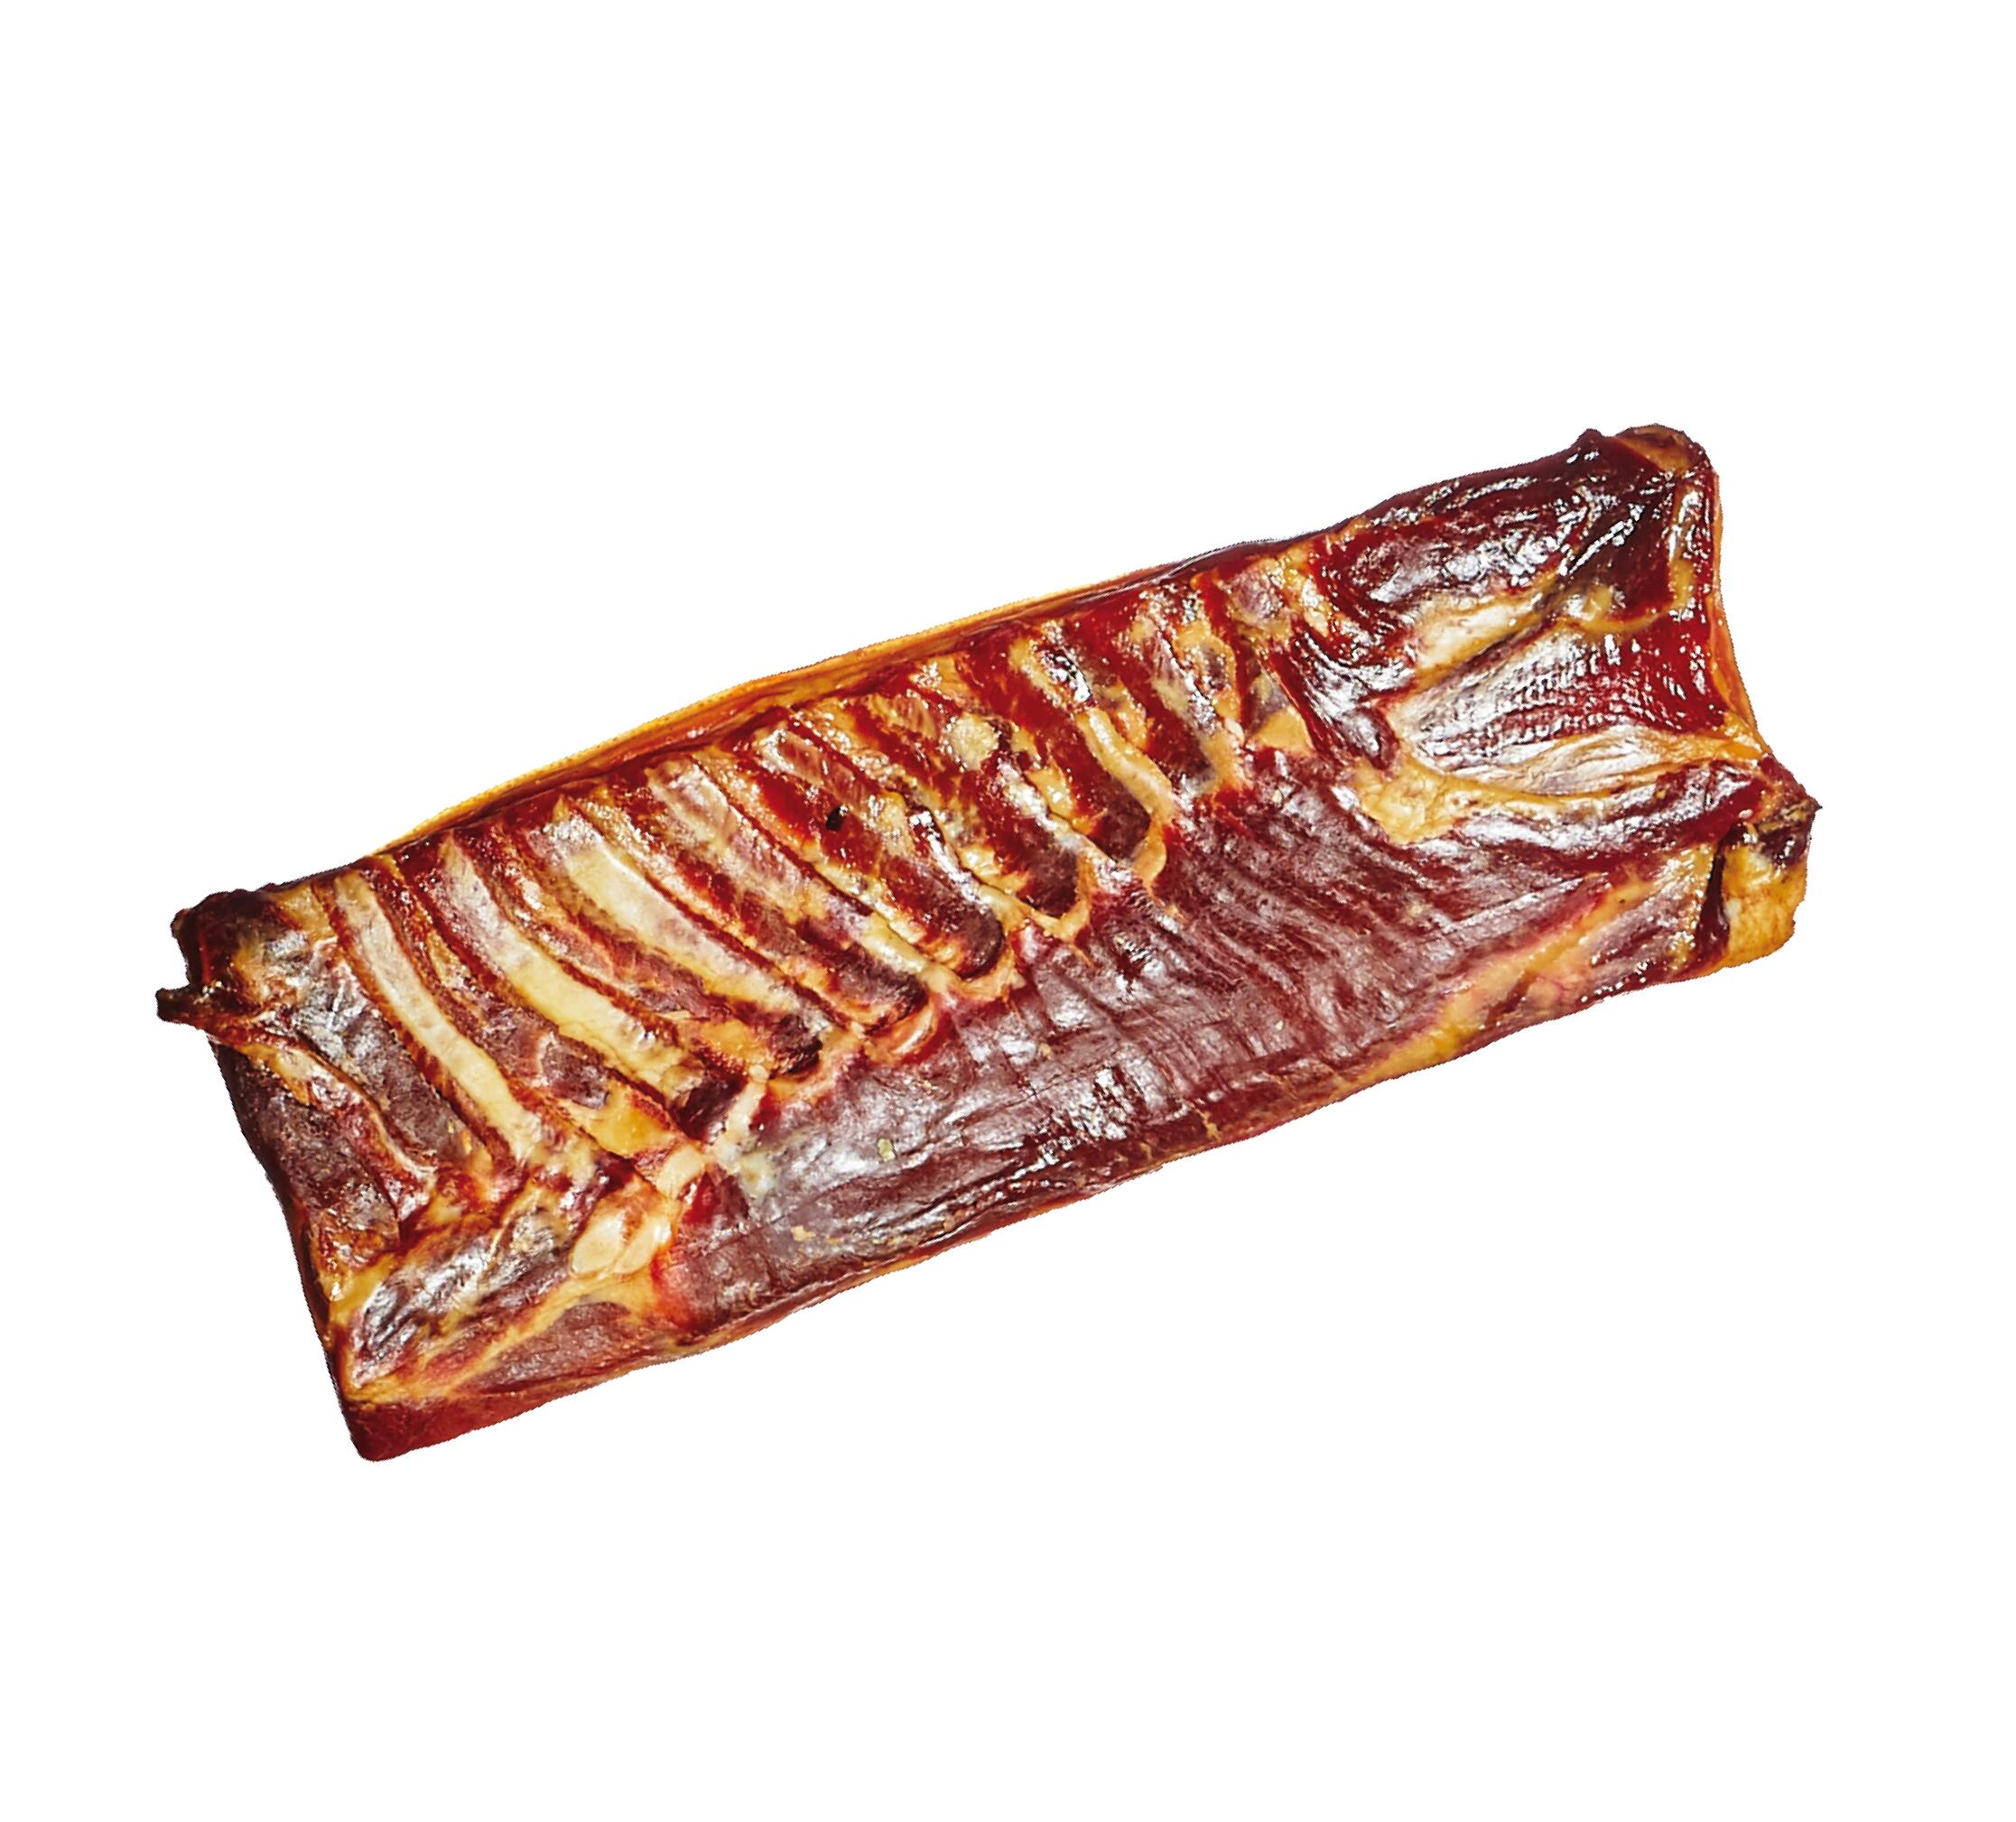 Meat products, dry salted lean bacon, whole +/- 2.5 Kg. 